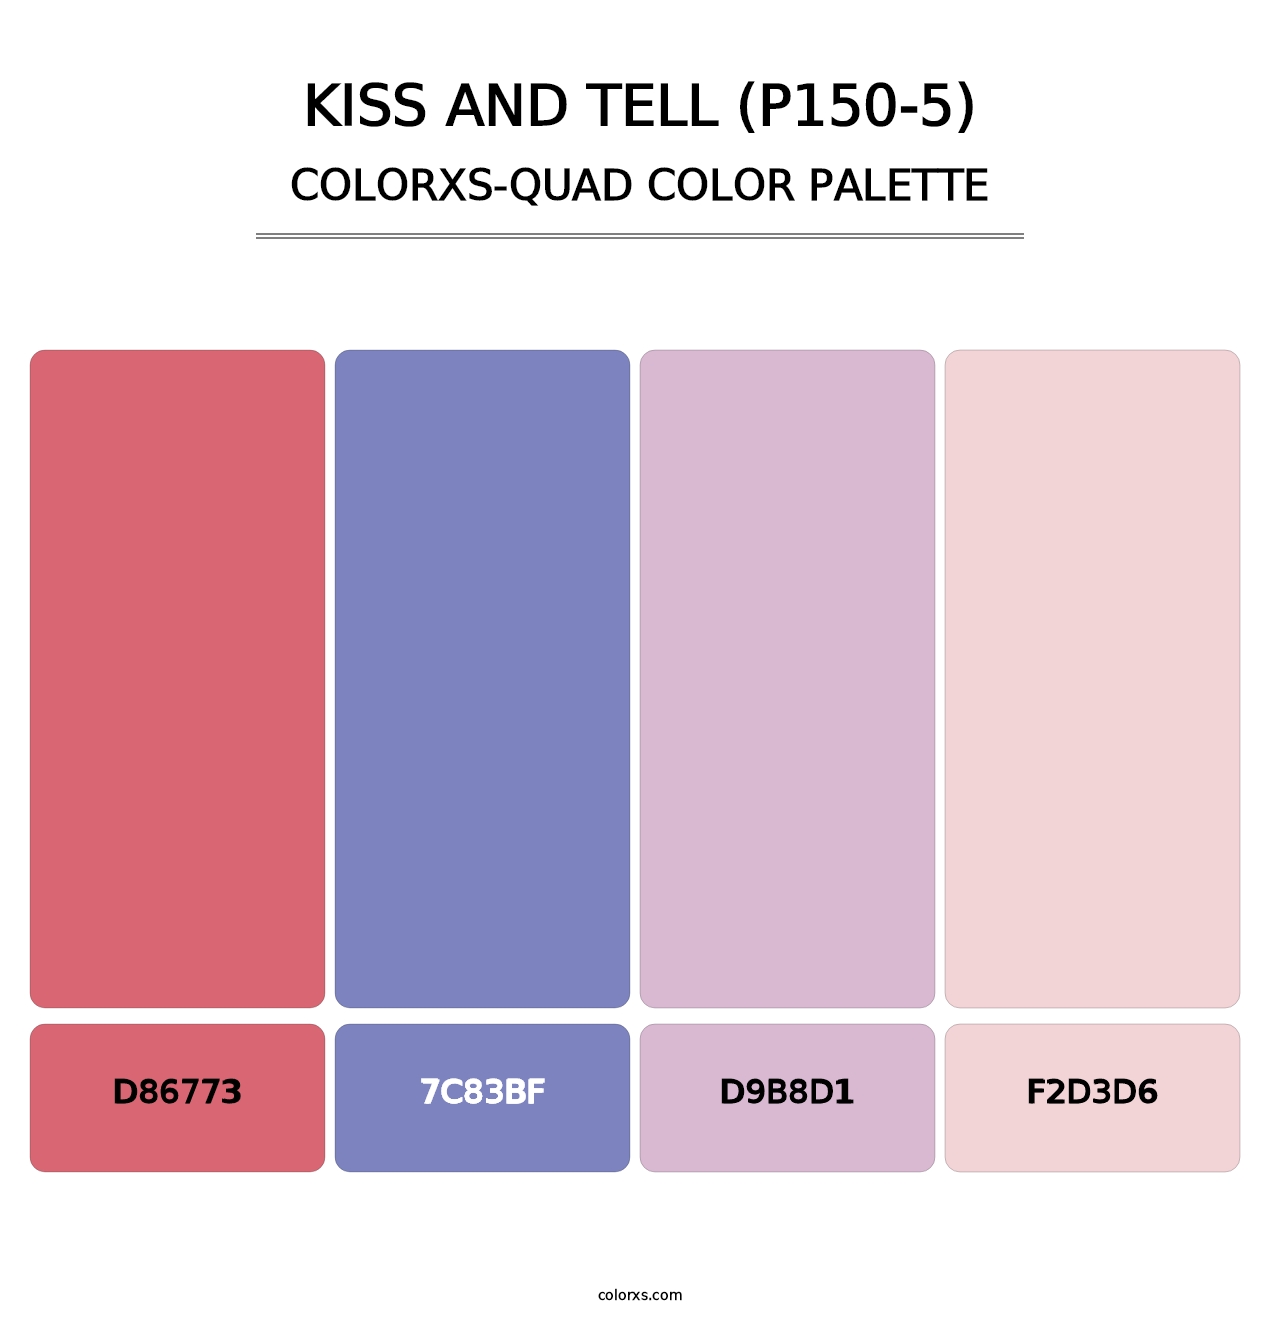 Kiss And Tell (P150-5) - Colorxs Quad Palette